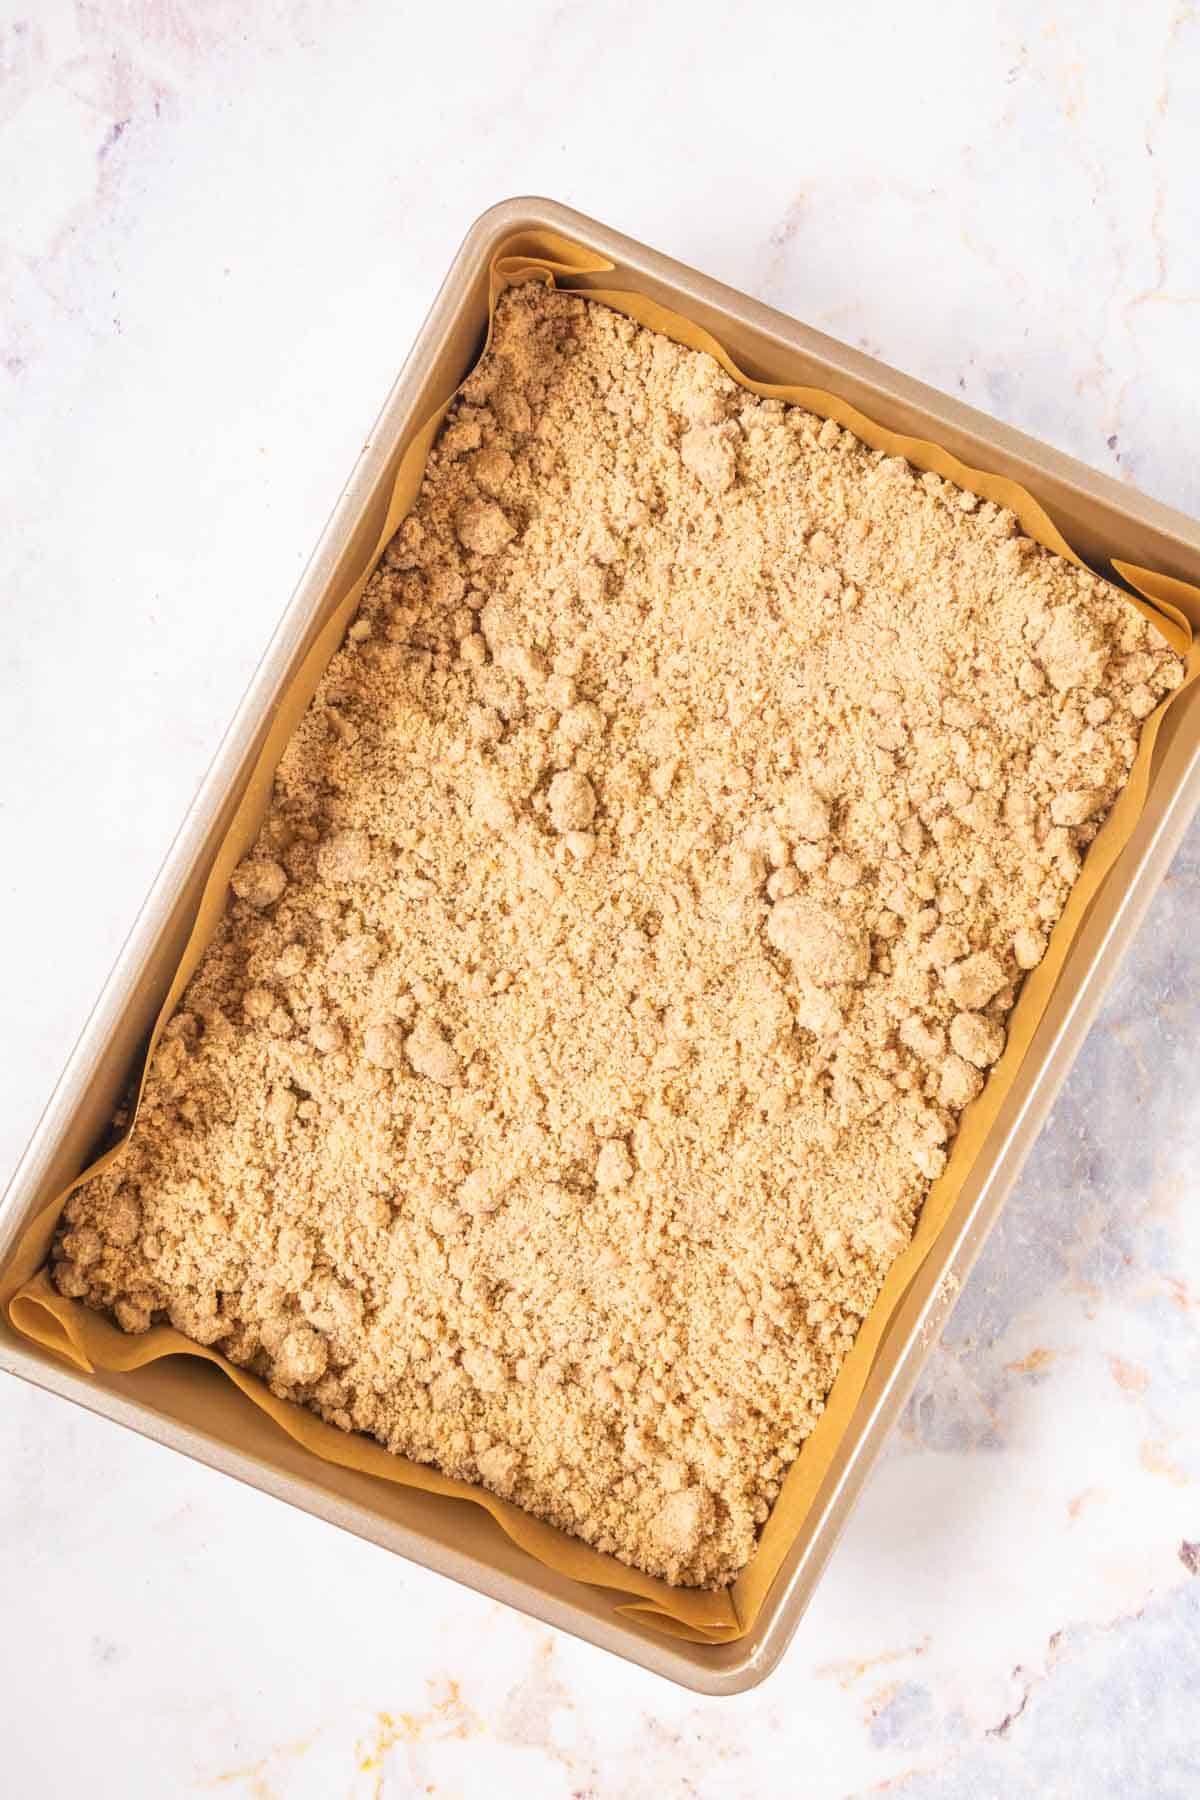 crumb cake with streusel topping in a baking dish before baking